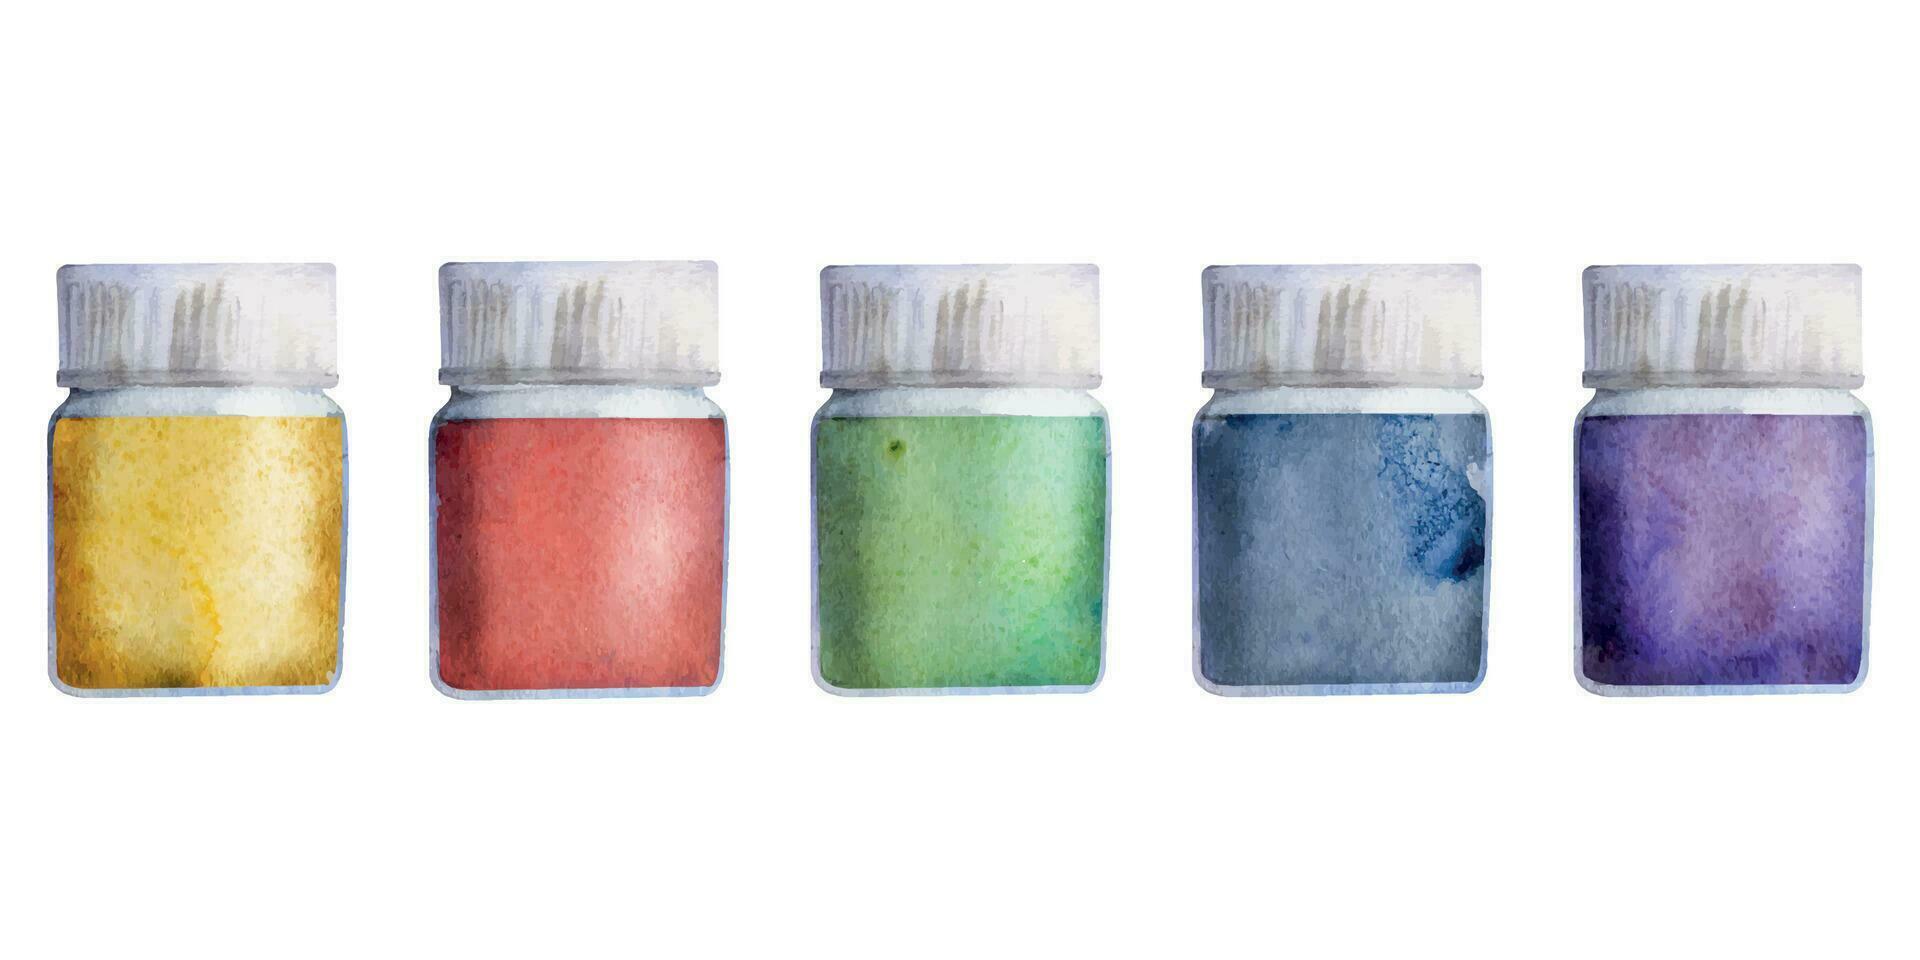 Watercolor hand drawn illustration, kids children paint materials supplies, mix color bottle with cap, closed lid stationery. Single object isolated on white. For school, shop, party, cards, website vector